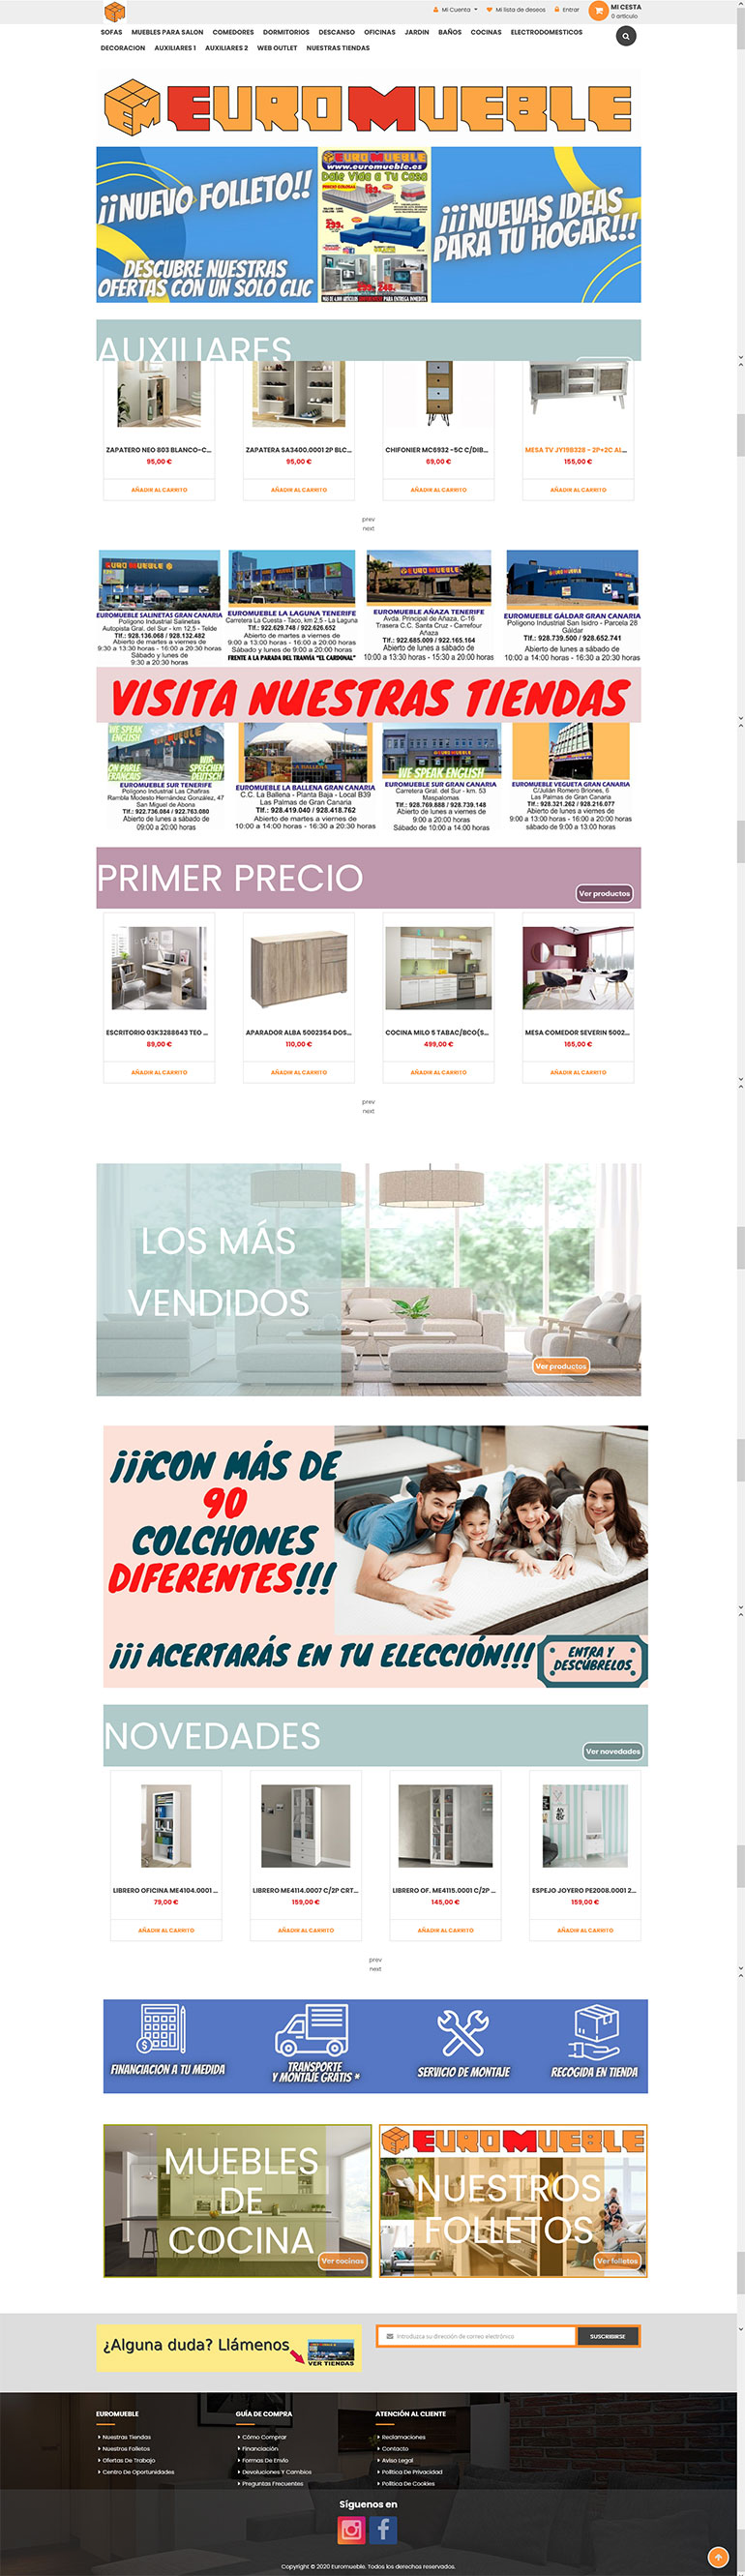 home page of magento 2